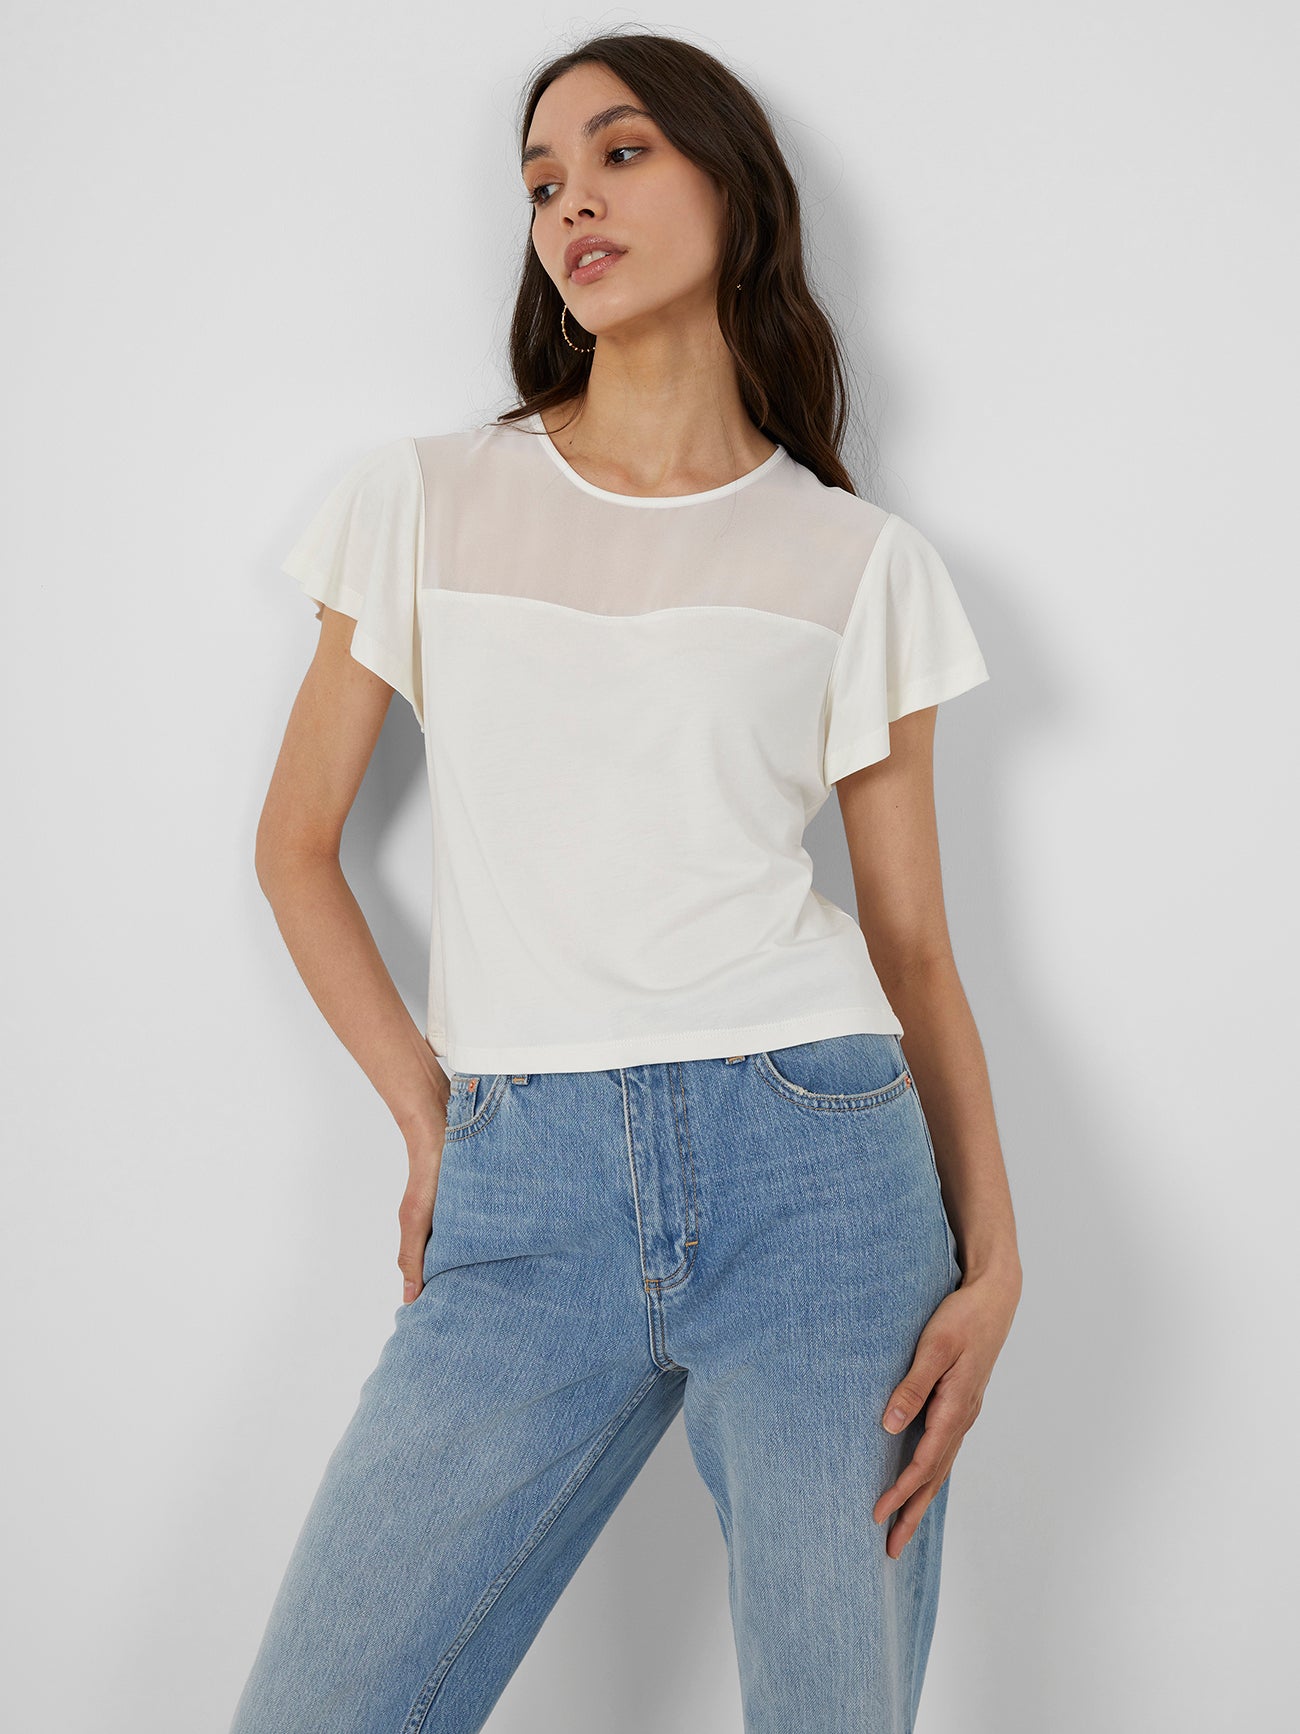 French Connection - Rezi Jersey Top | French Connection |  Shirts & Tops | Small - White - Size: S